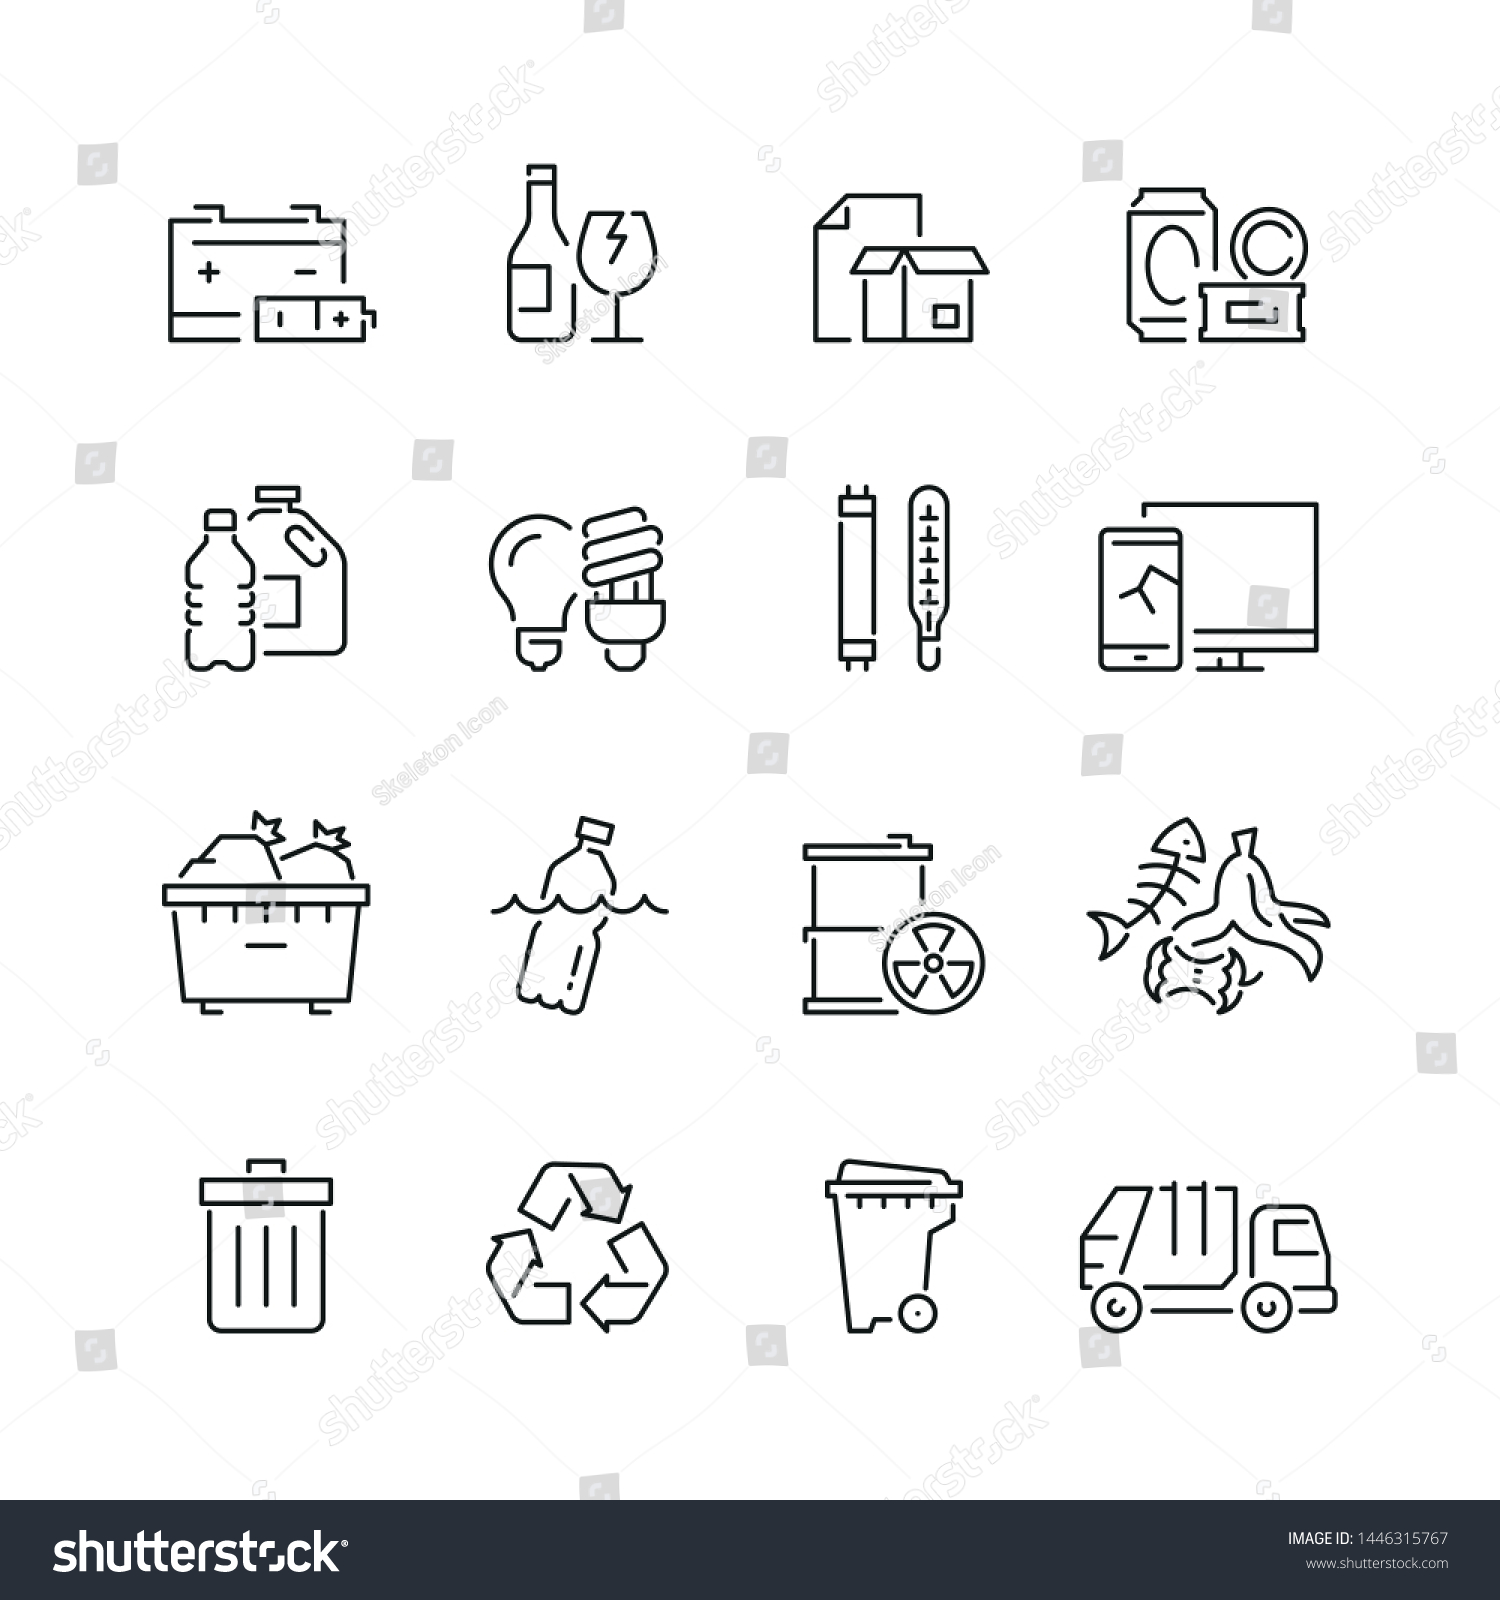 Trash related icons: thin vector icon set, black and white kit #1446315767